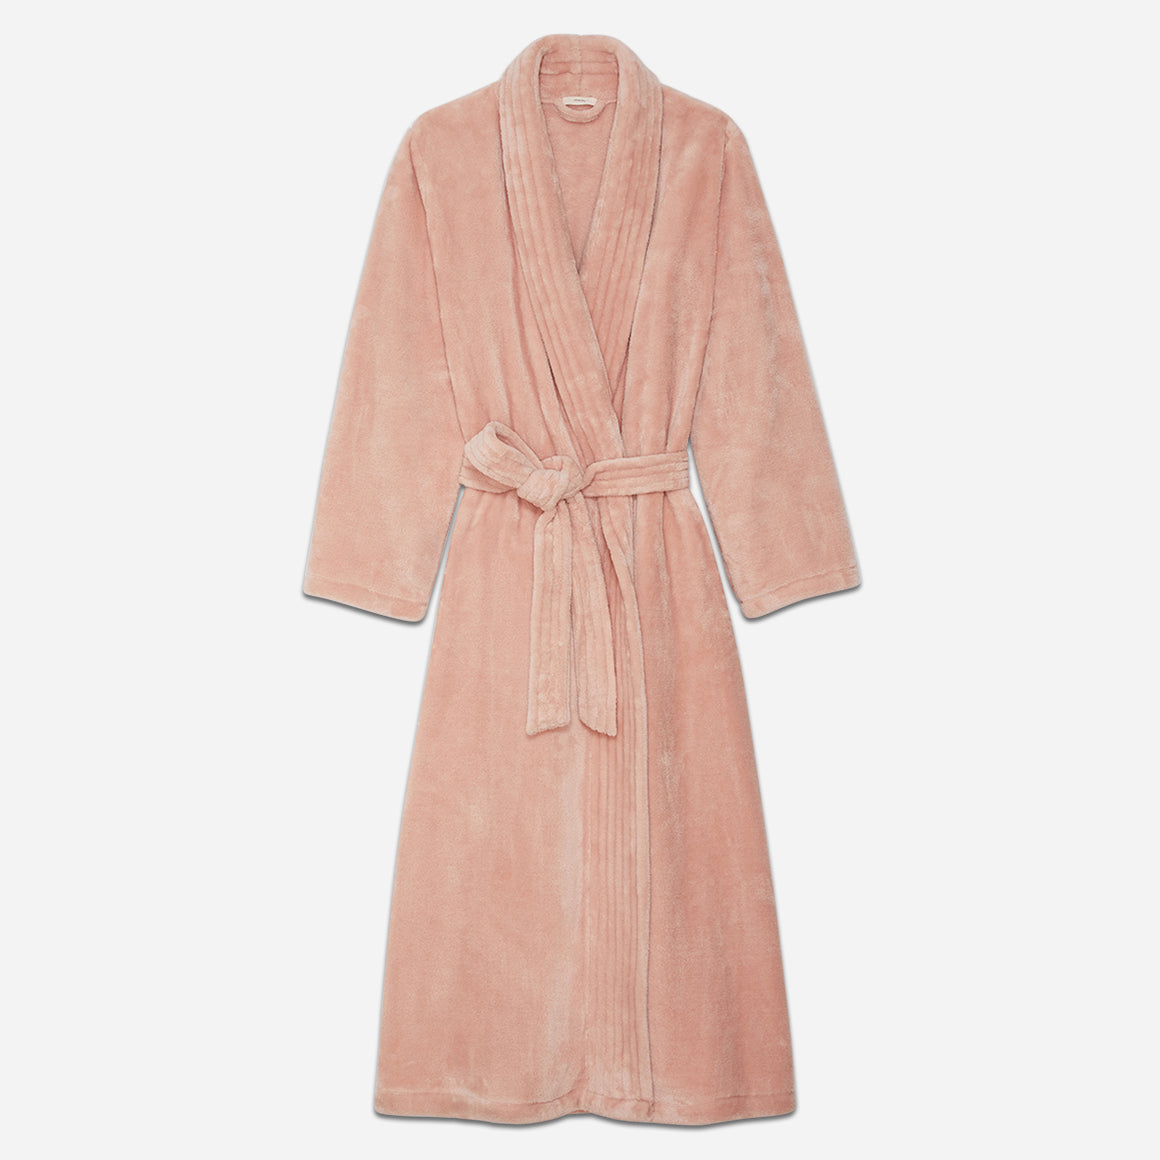 Eberjey's Chalet Recycled Plush Robe in a rose colorway photographed against a light gray background.